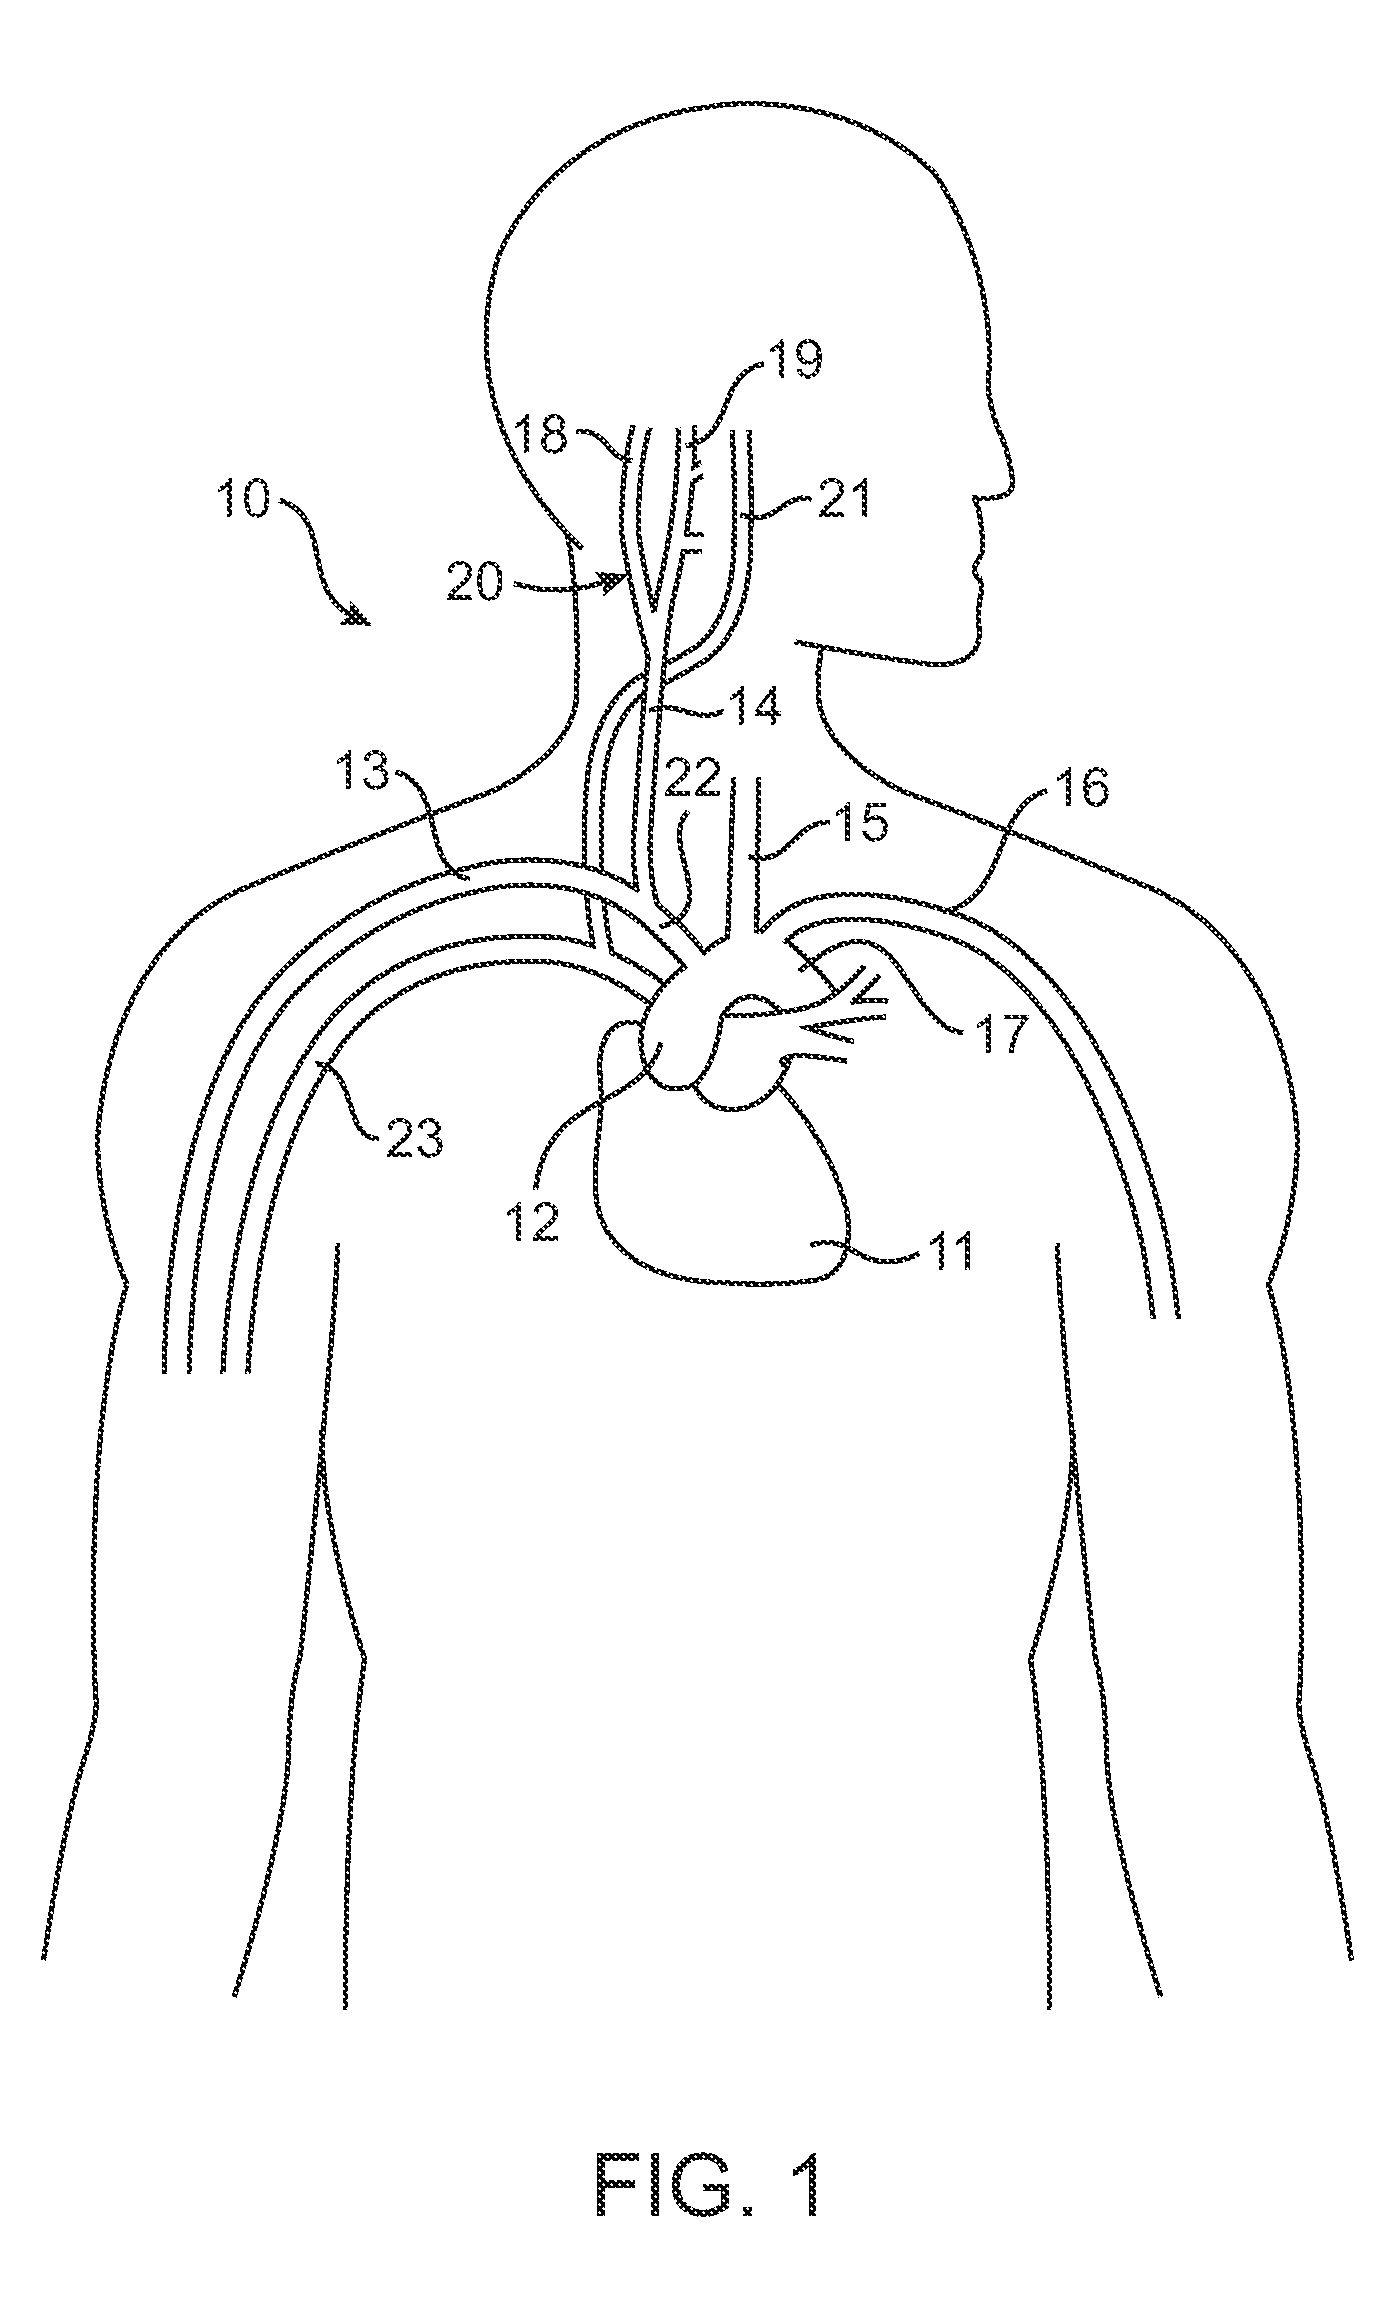 Baroreflex activation therapy device with pacing cardiac electrical signal detection capability